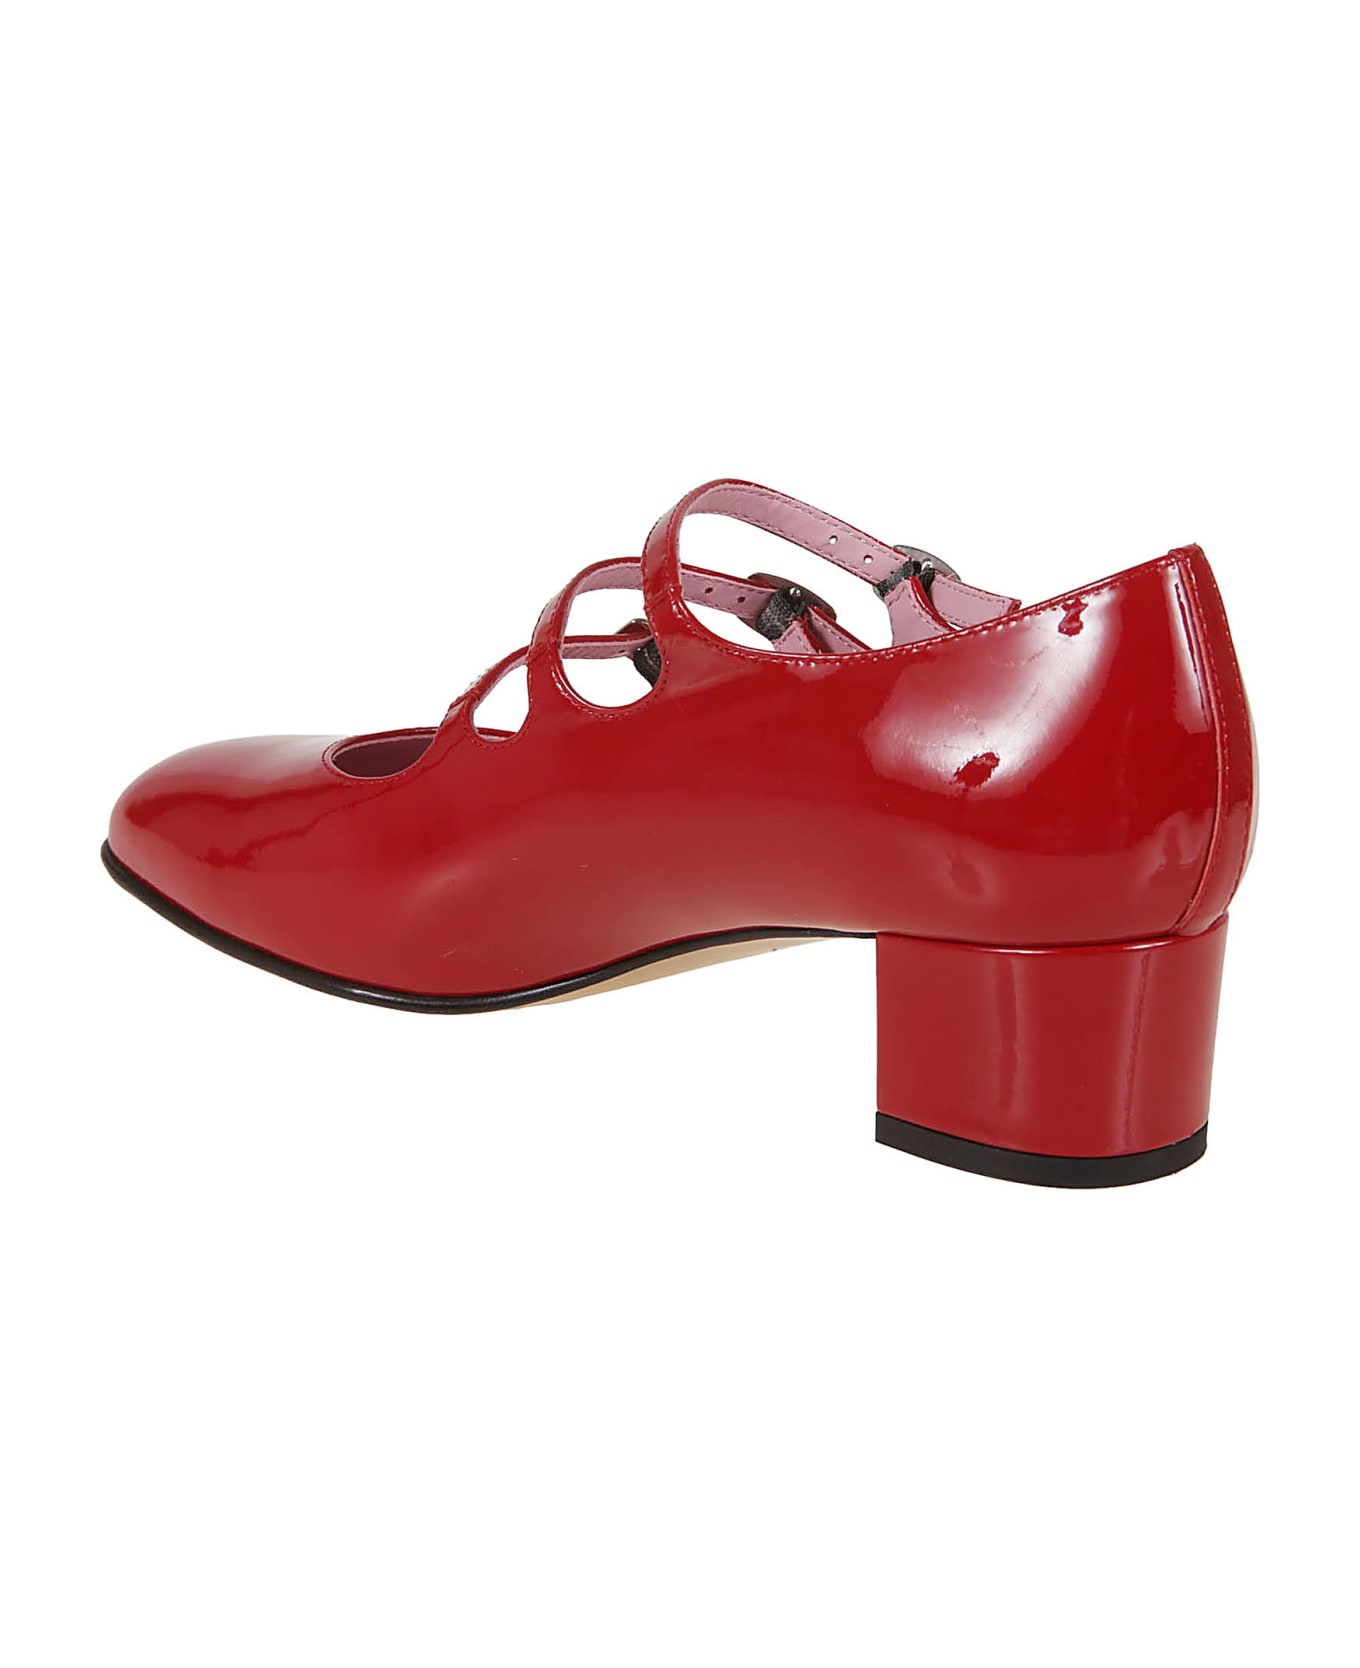 Carel Kina Patent Leather - Red Patent Leather